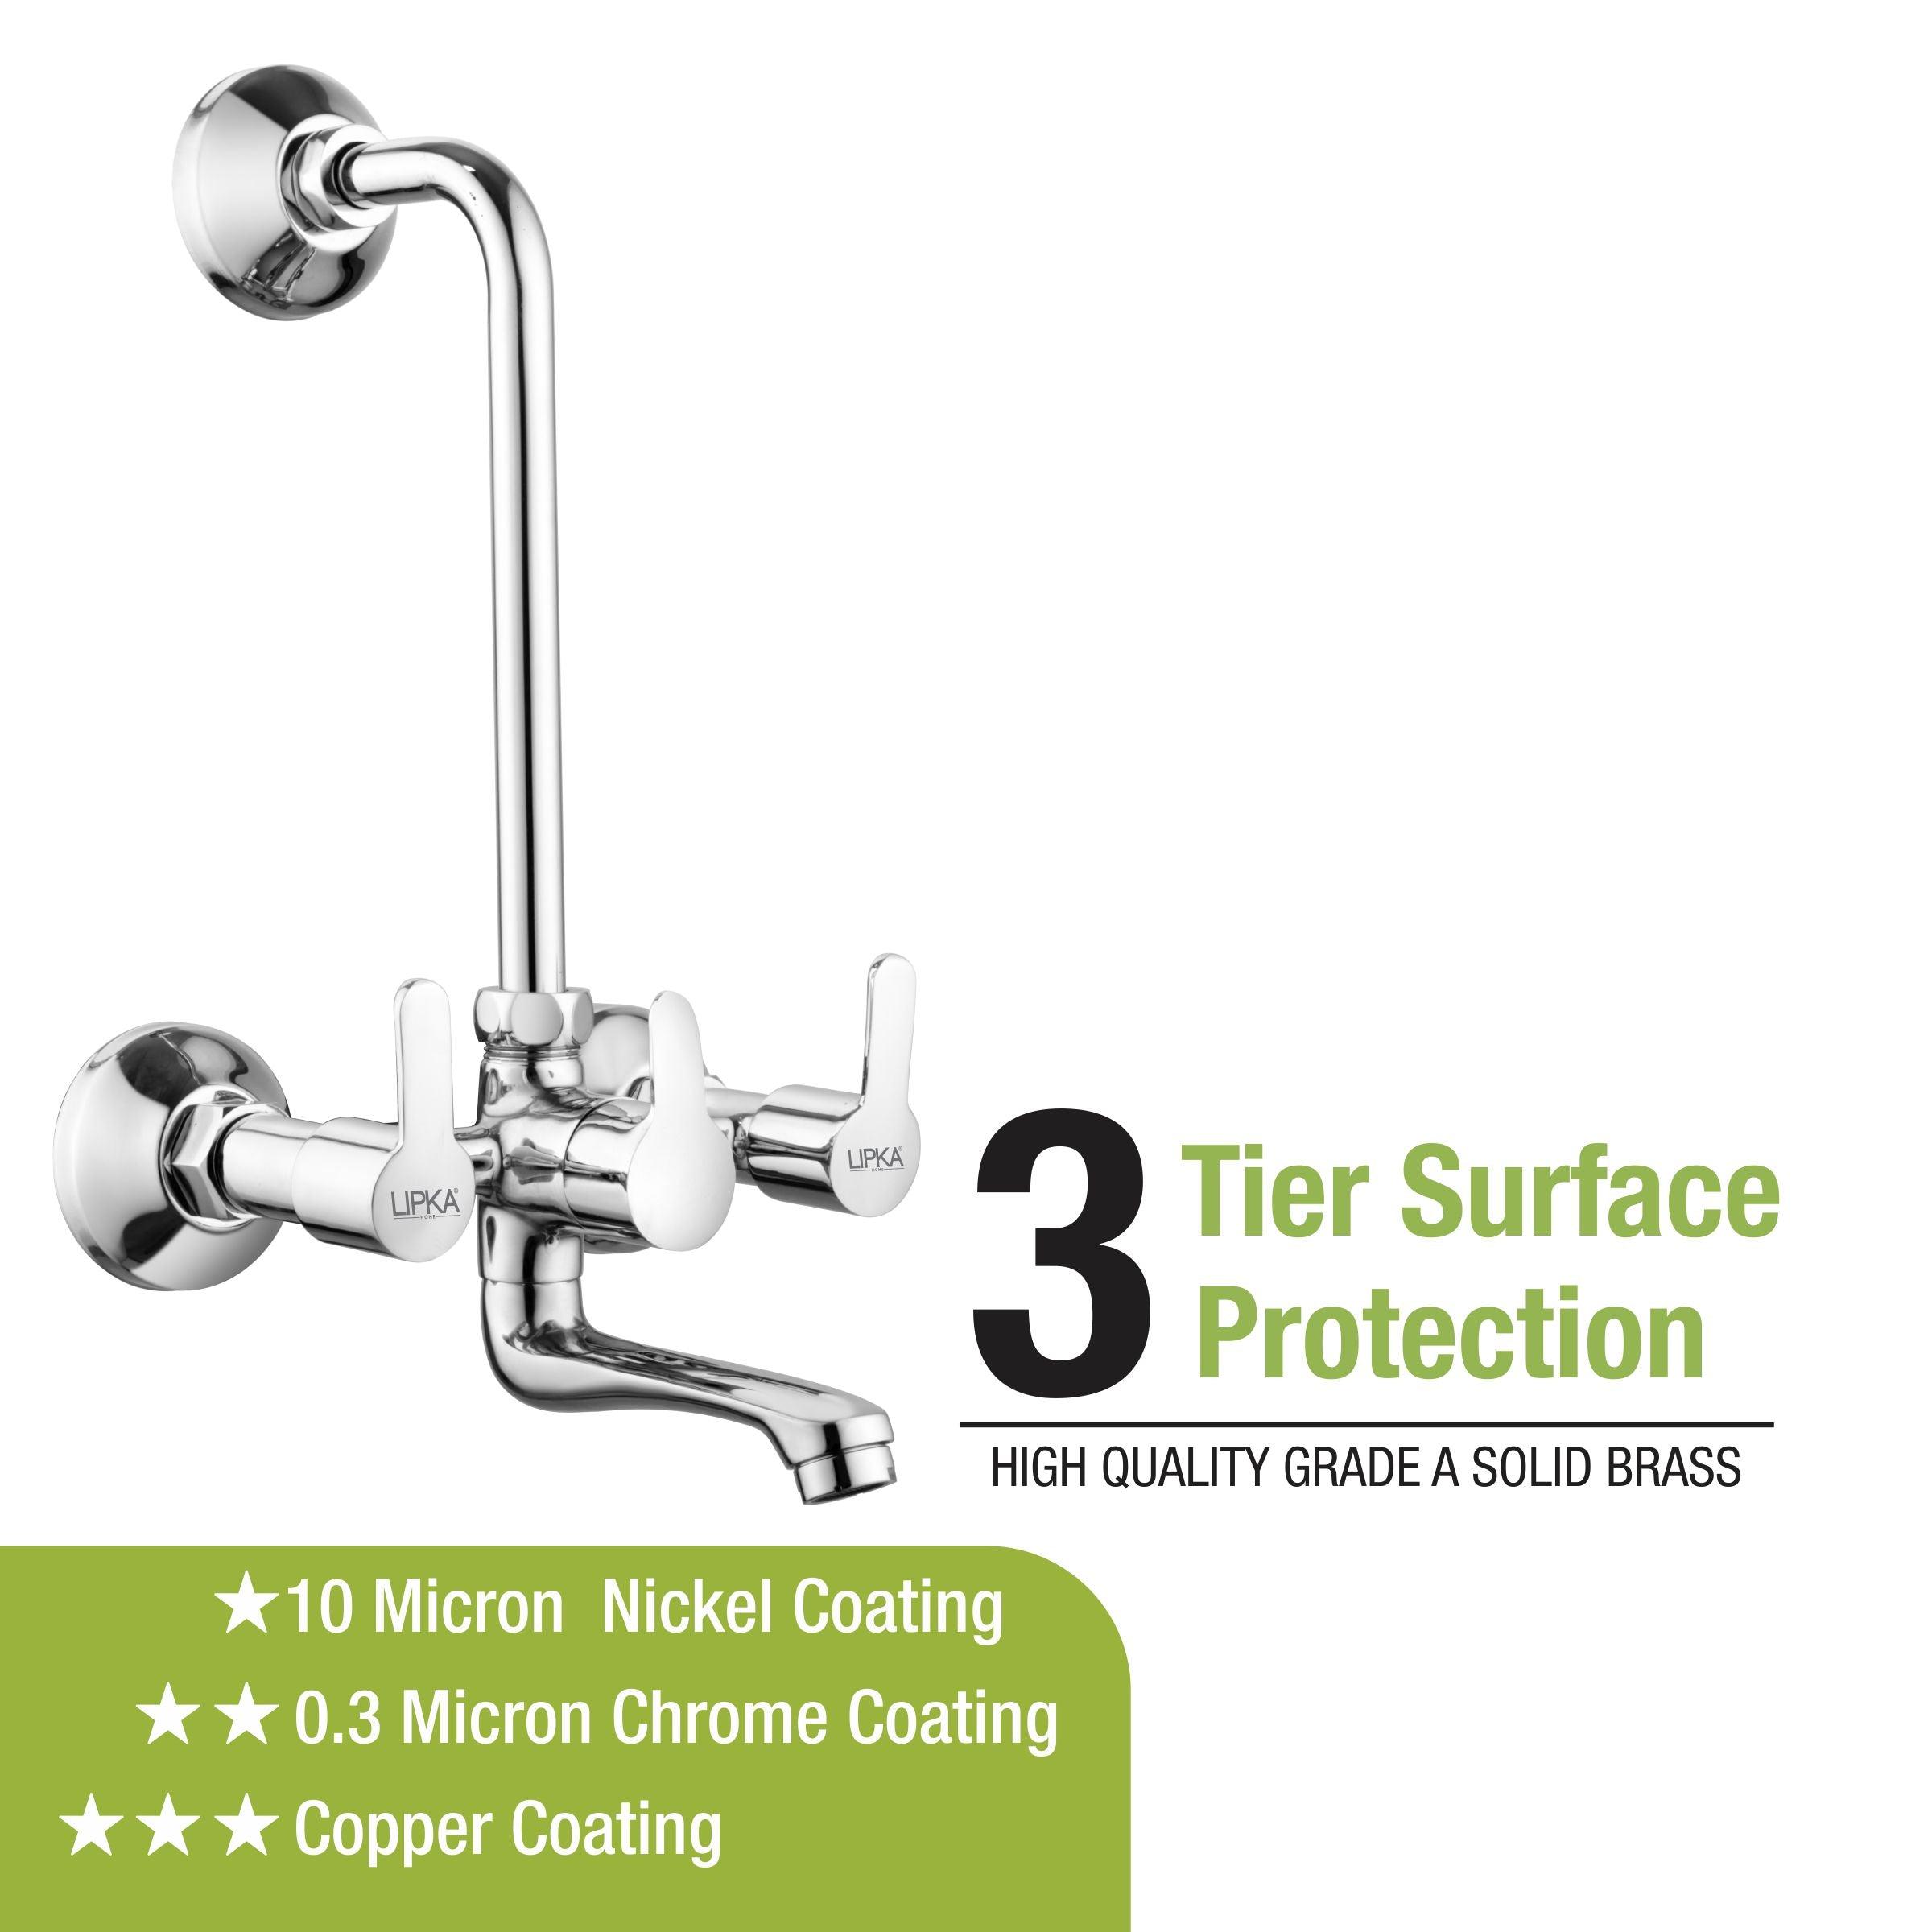 Frenk Wall Mixer with L Bend Faucet with 3 tier surface protection